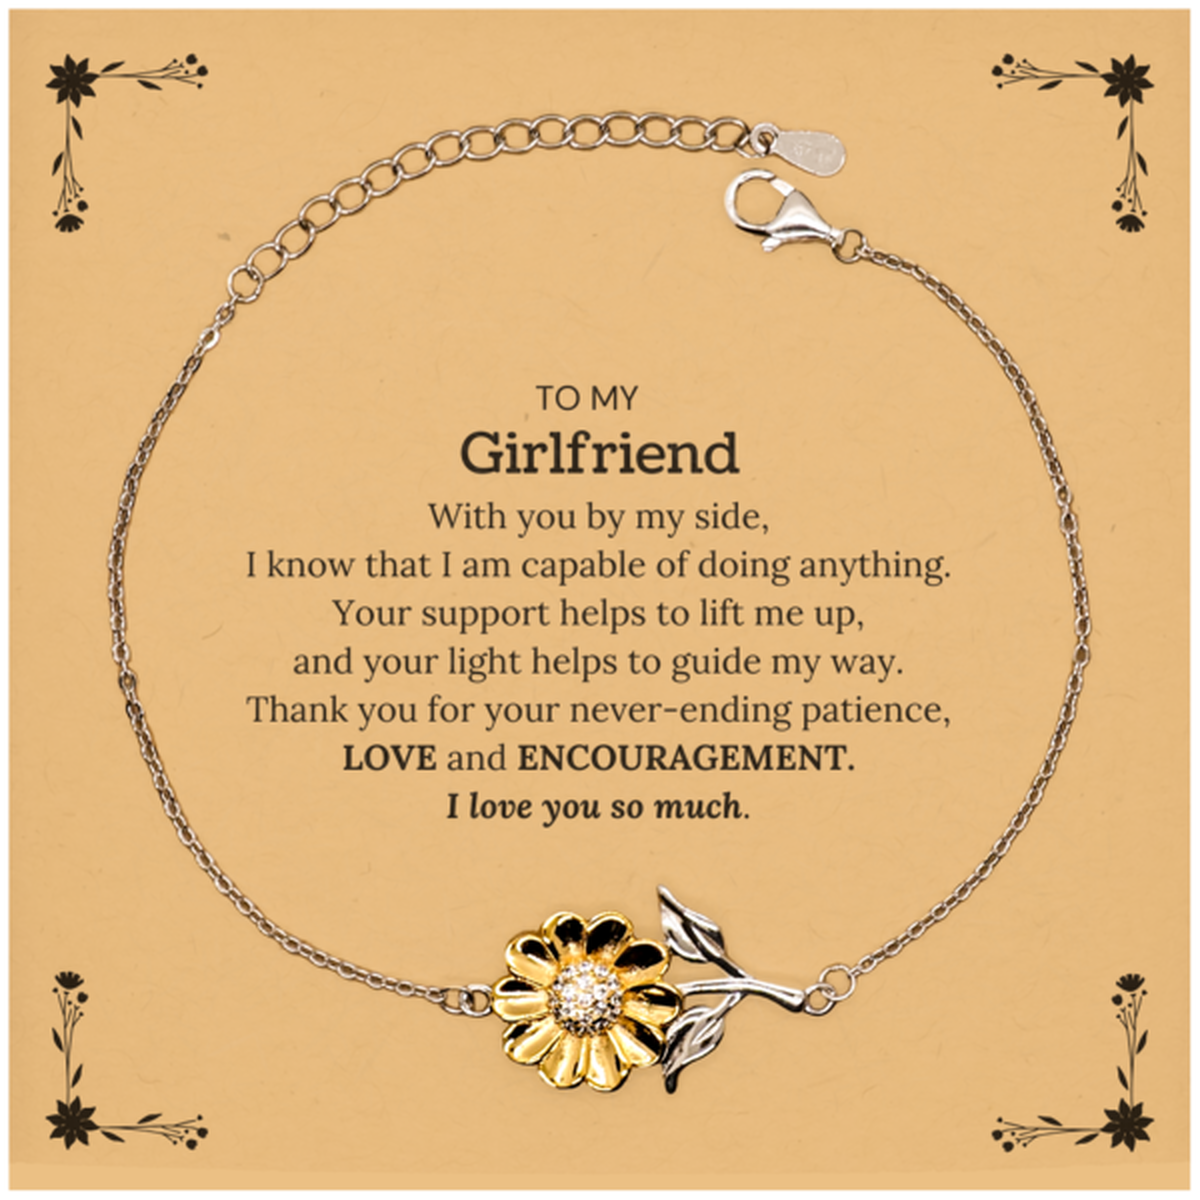 Appreciation Girlfriend Sunflower Bracelet Gifts, To My Girlfriend Birthday Christmas Wedding Keepsake Gifts for Girlfriend With you by my side, I know that I am capable of doing anything. I love you so much